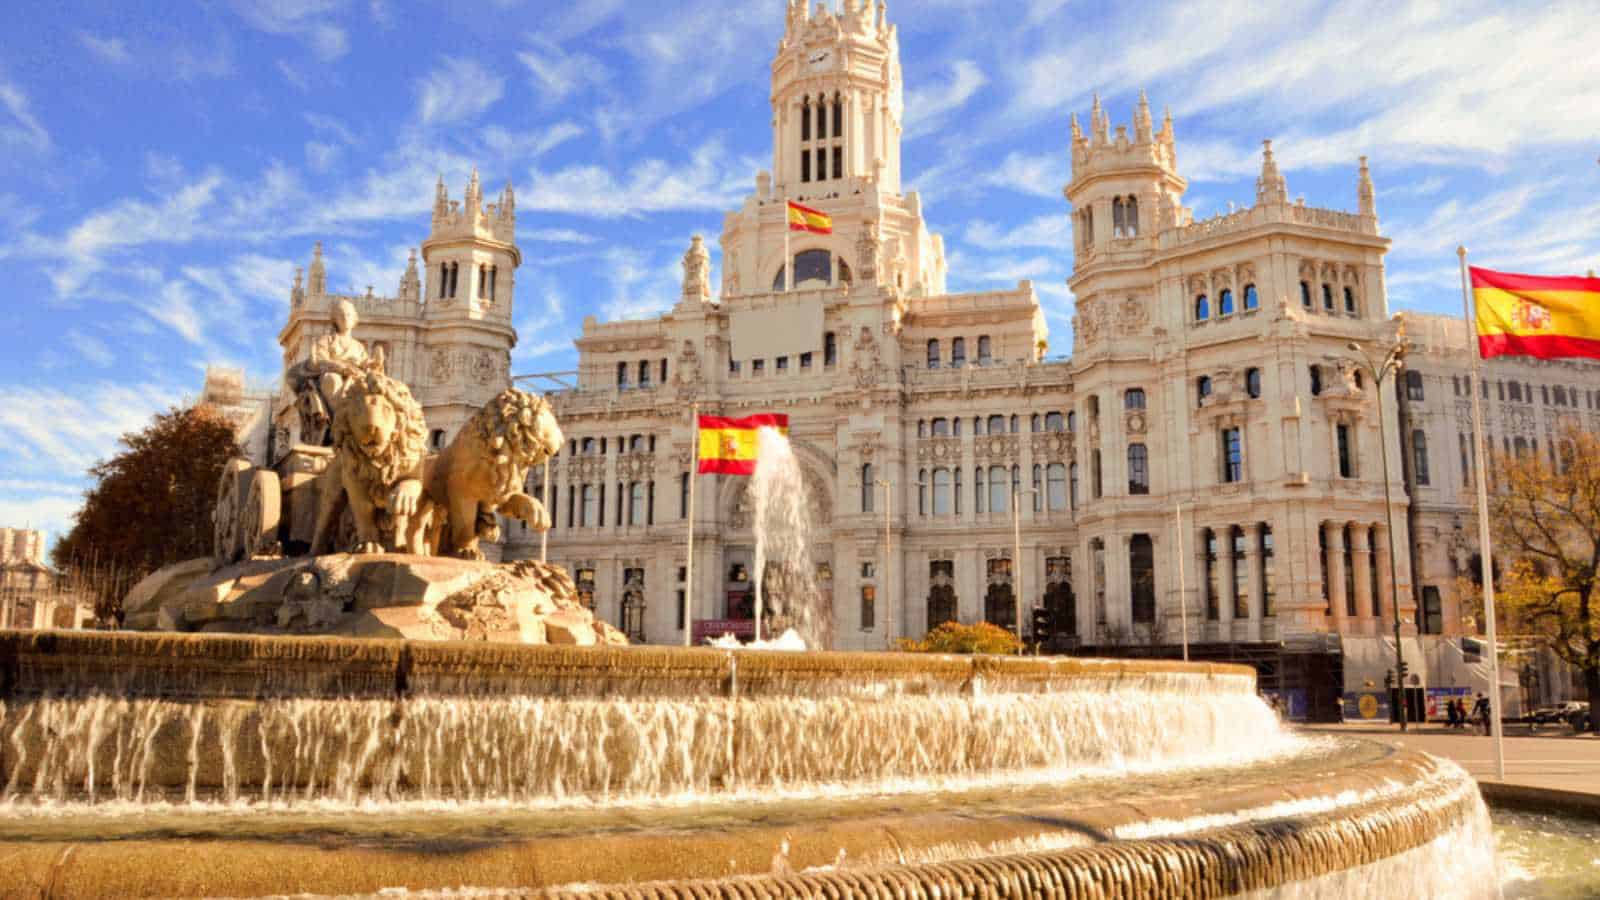 The famous Cibeles fountain in Madrid, Spain